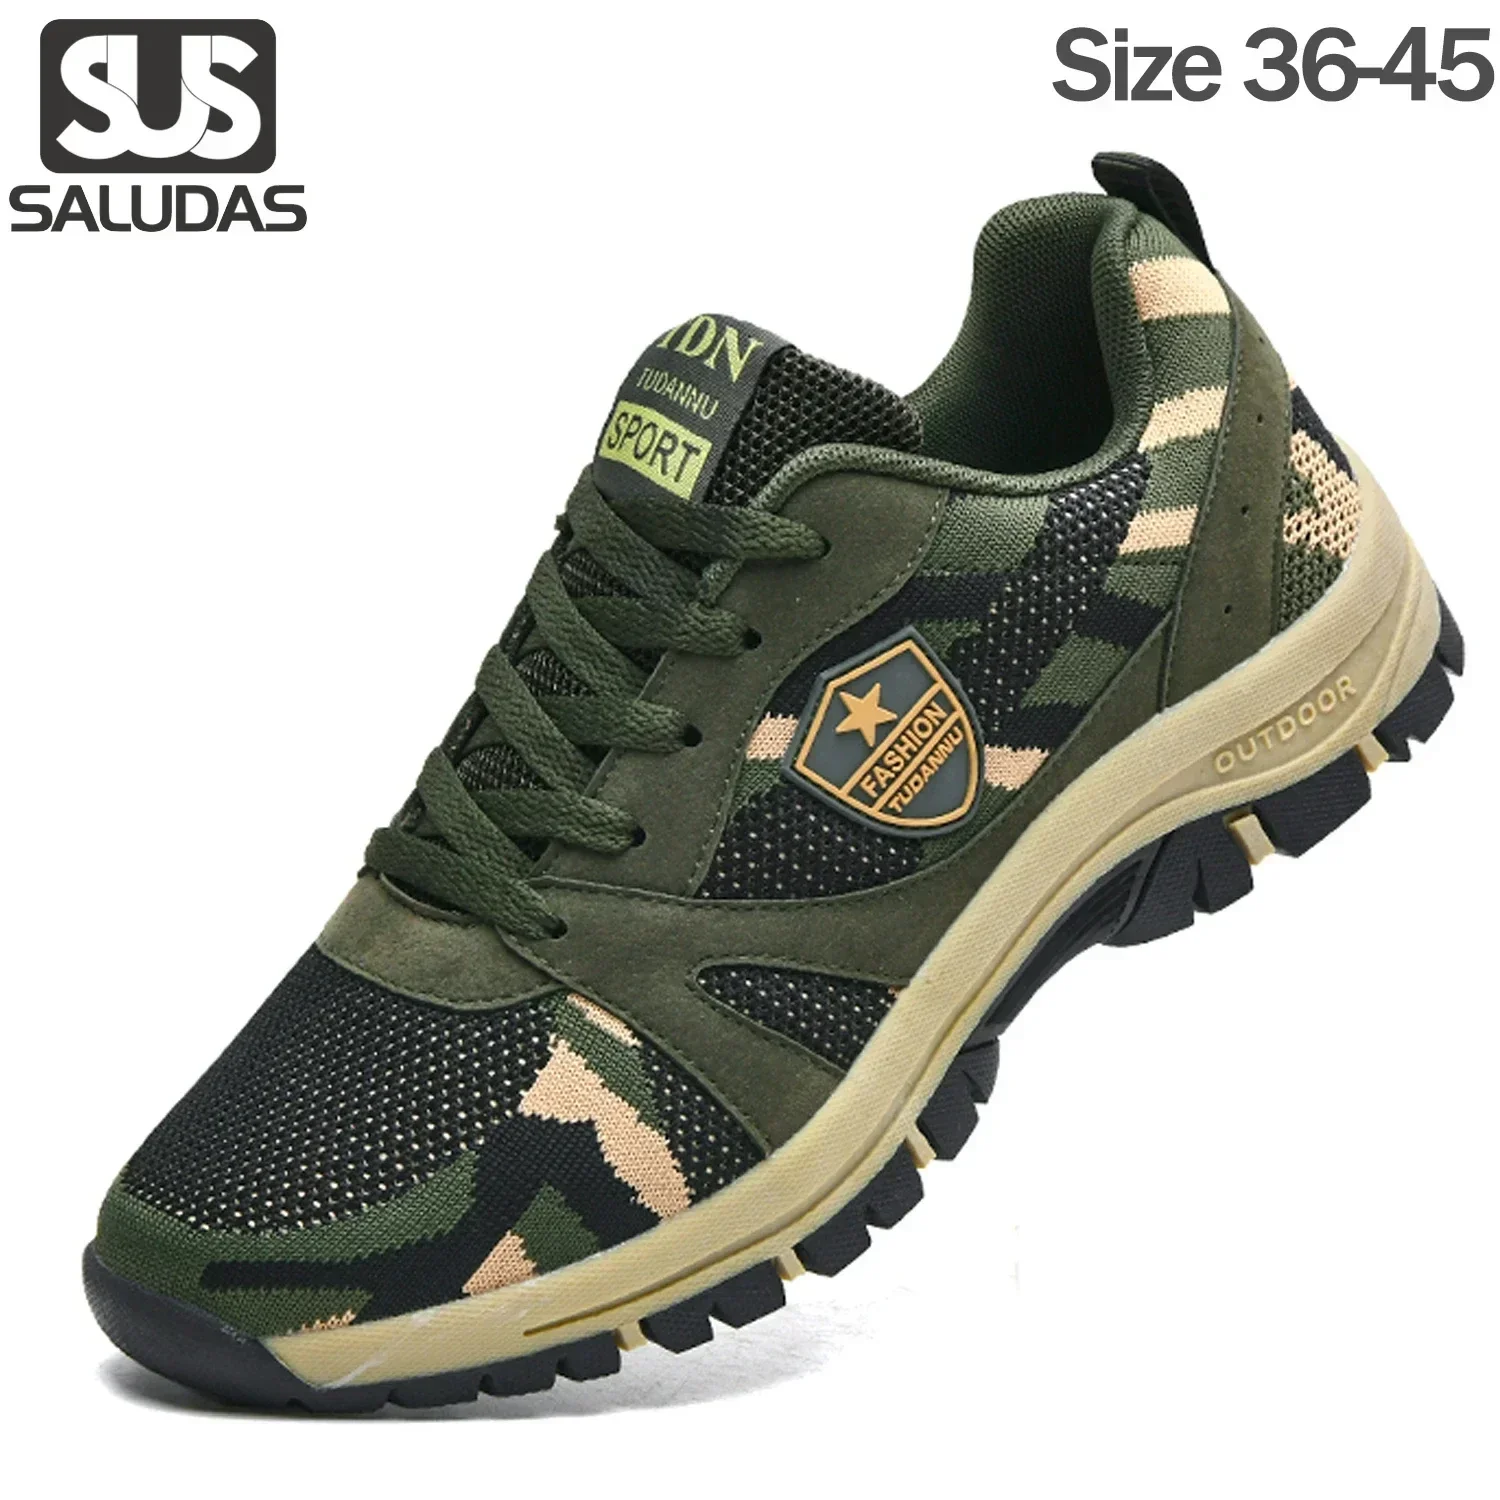 

SALUDAS Men's Hiking Shoes Camouflage Mesh Breathable Hiking Shoes Jungle Adventure Camping Mountaineering Cross-Country Shoes